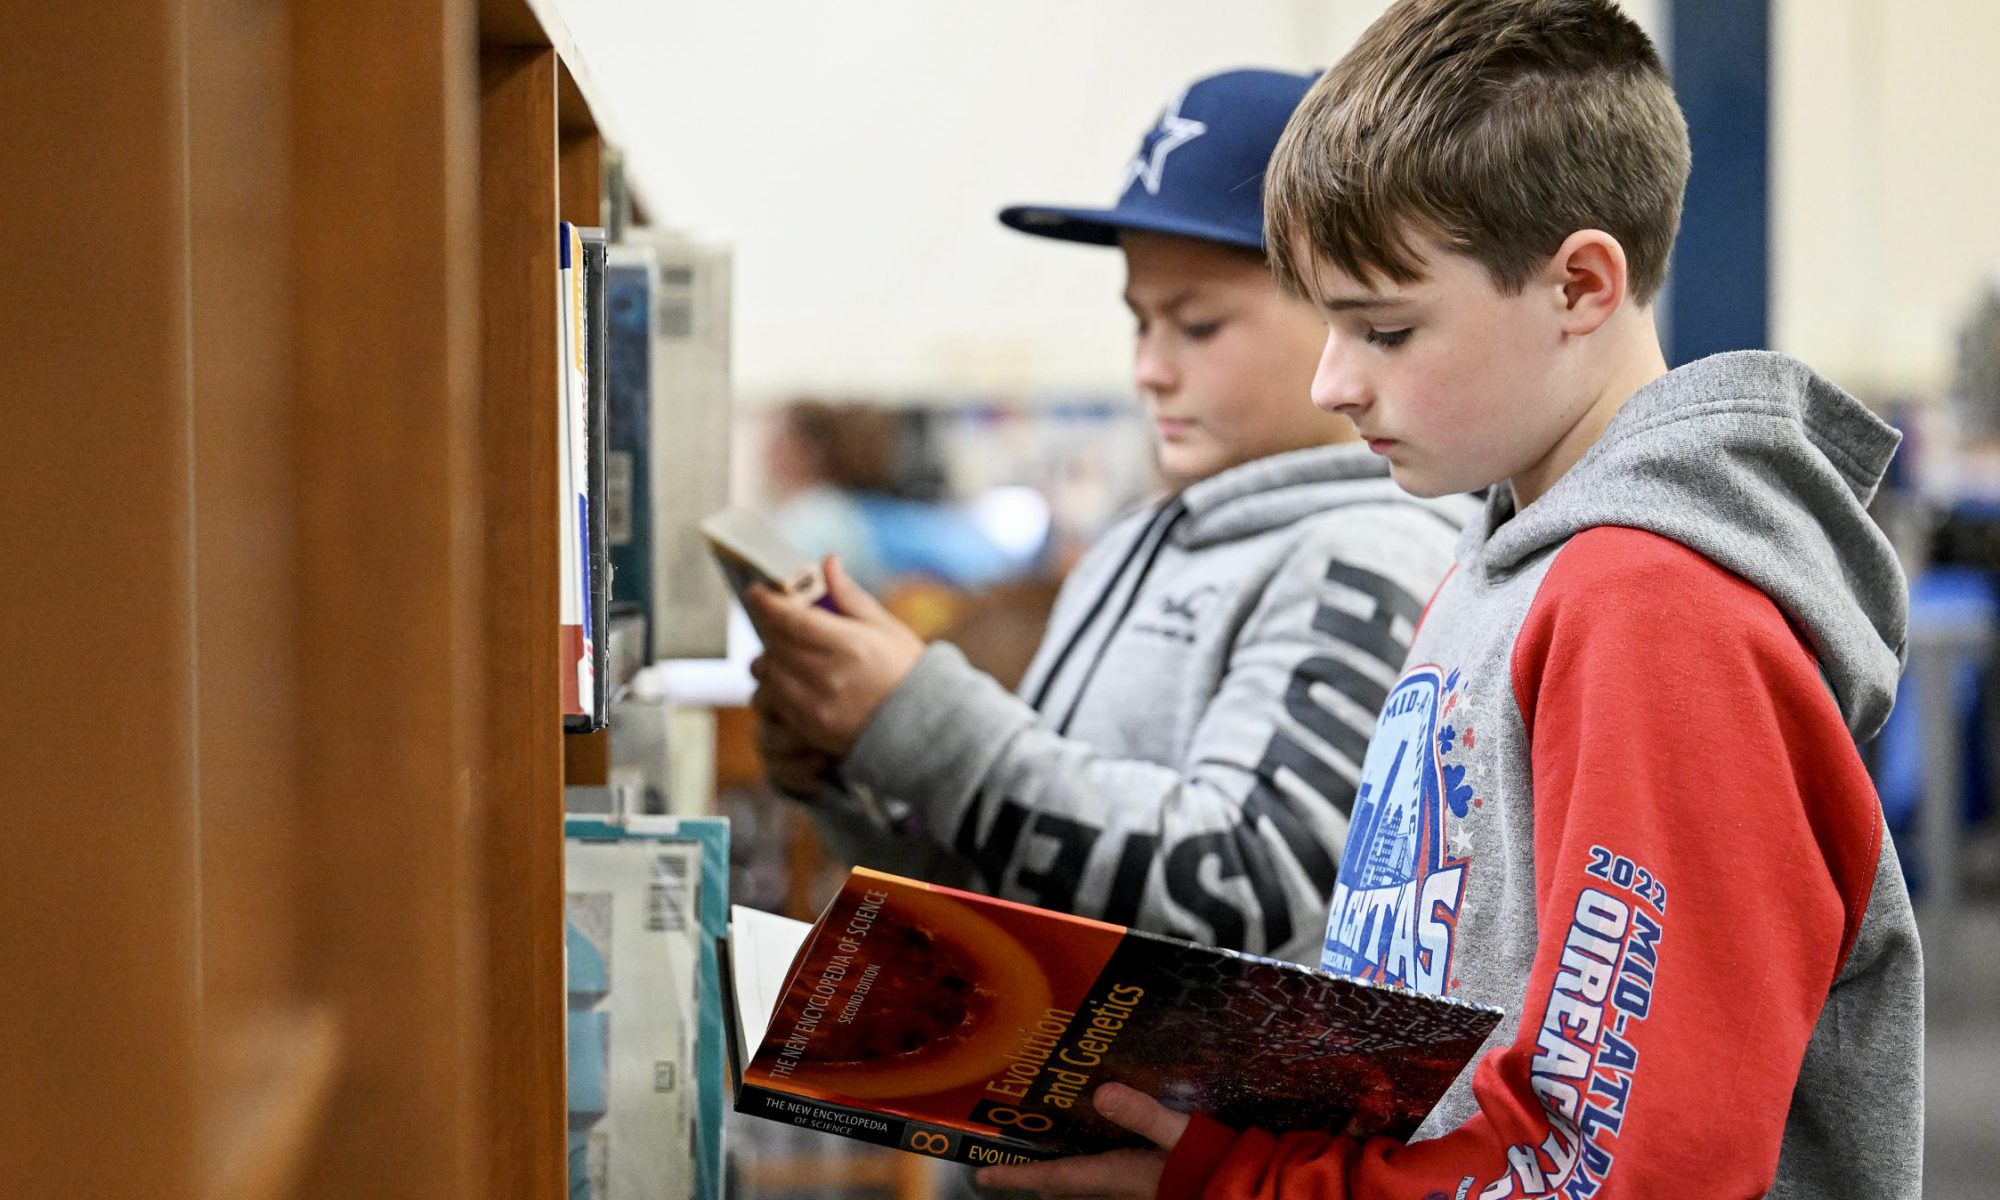 Two Middle School students stand as they browse through books in the VCMS Library stacks.